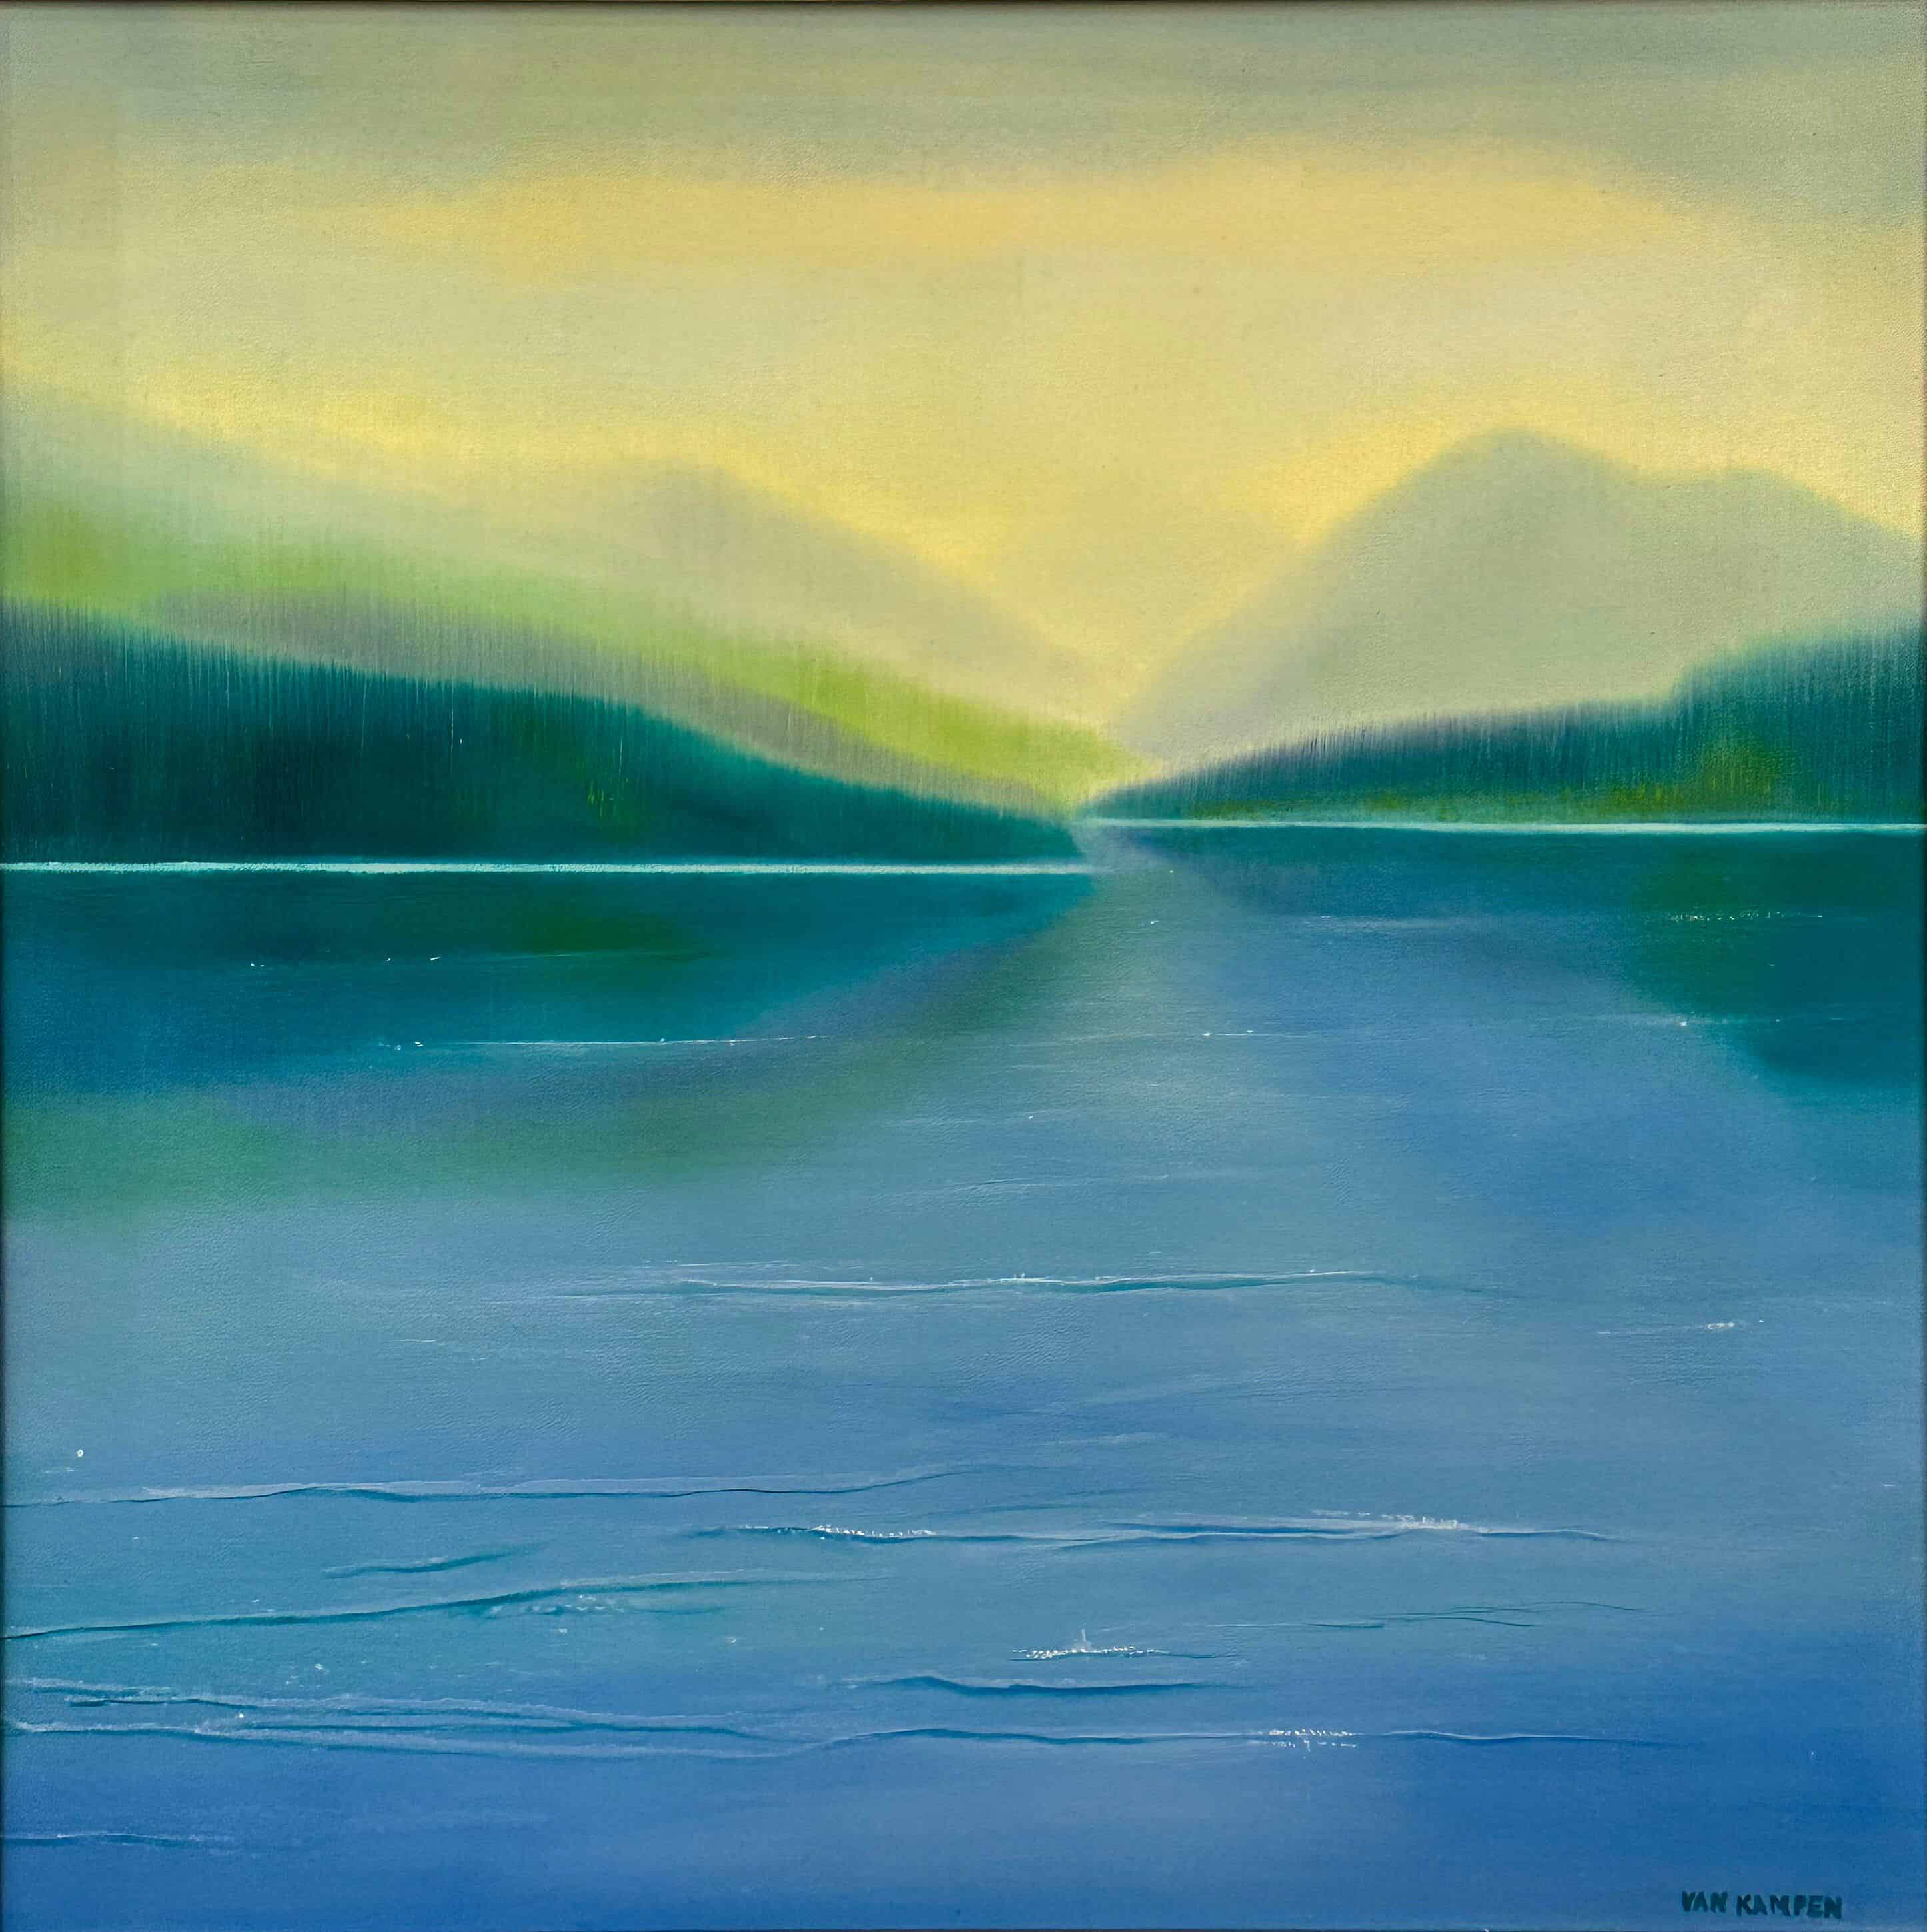 Contemporary Art. Title: Morning Calm, Oil on Canvas, 30 x 30 in by Canadian artist Katherine van Kampen.